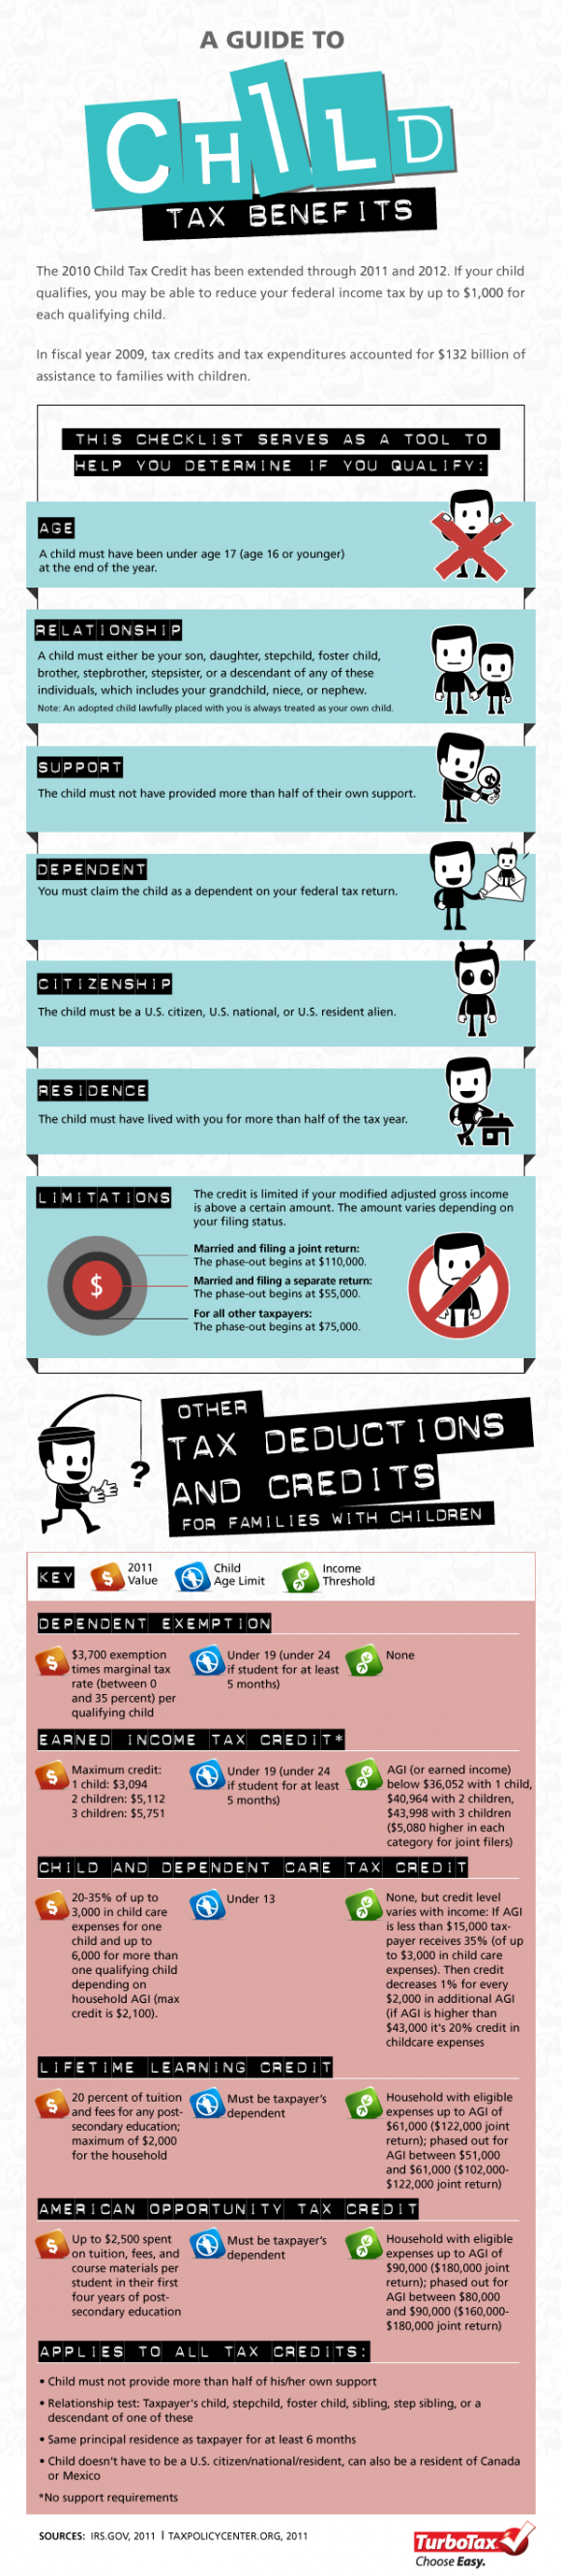 A Guide to Child Tax Benefits